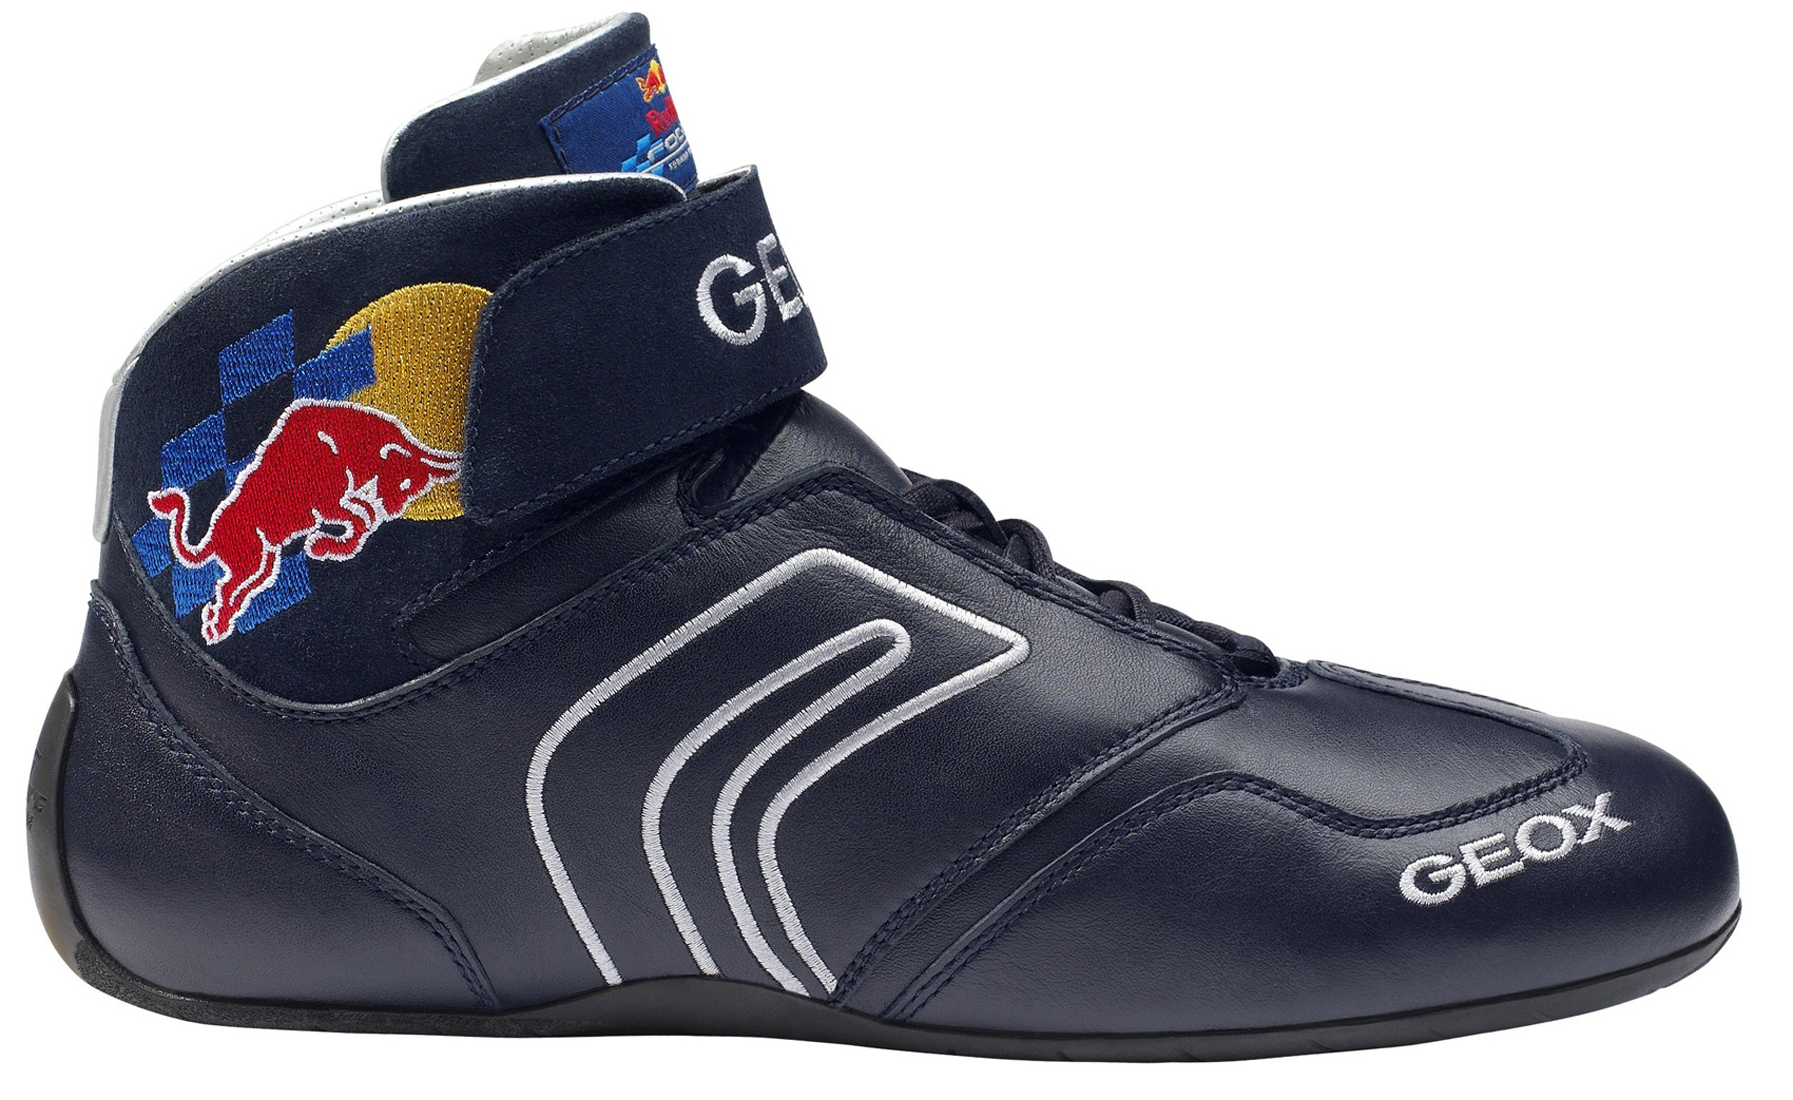 F1 Racing Shoes